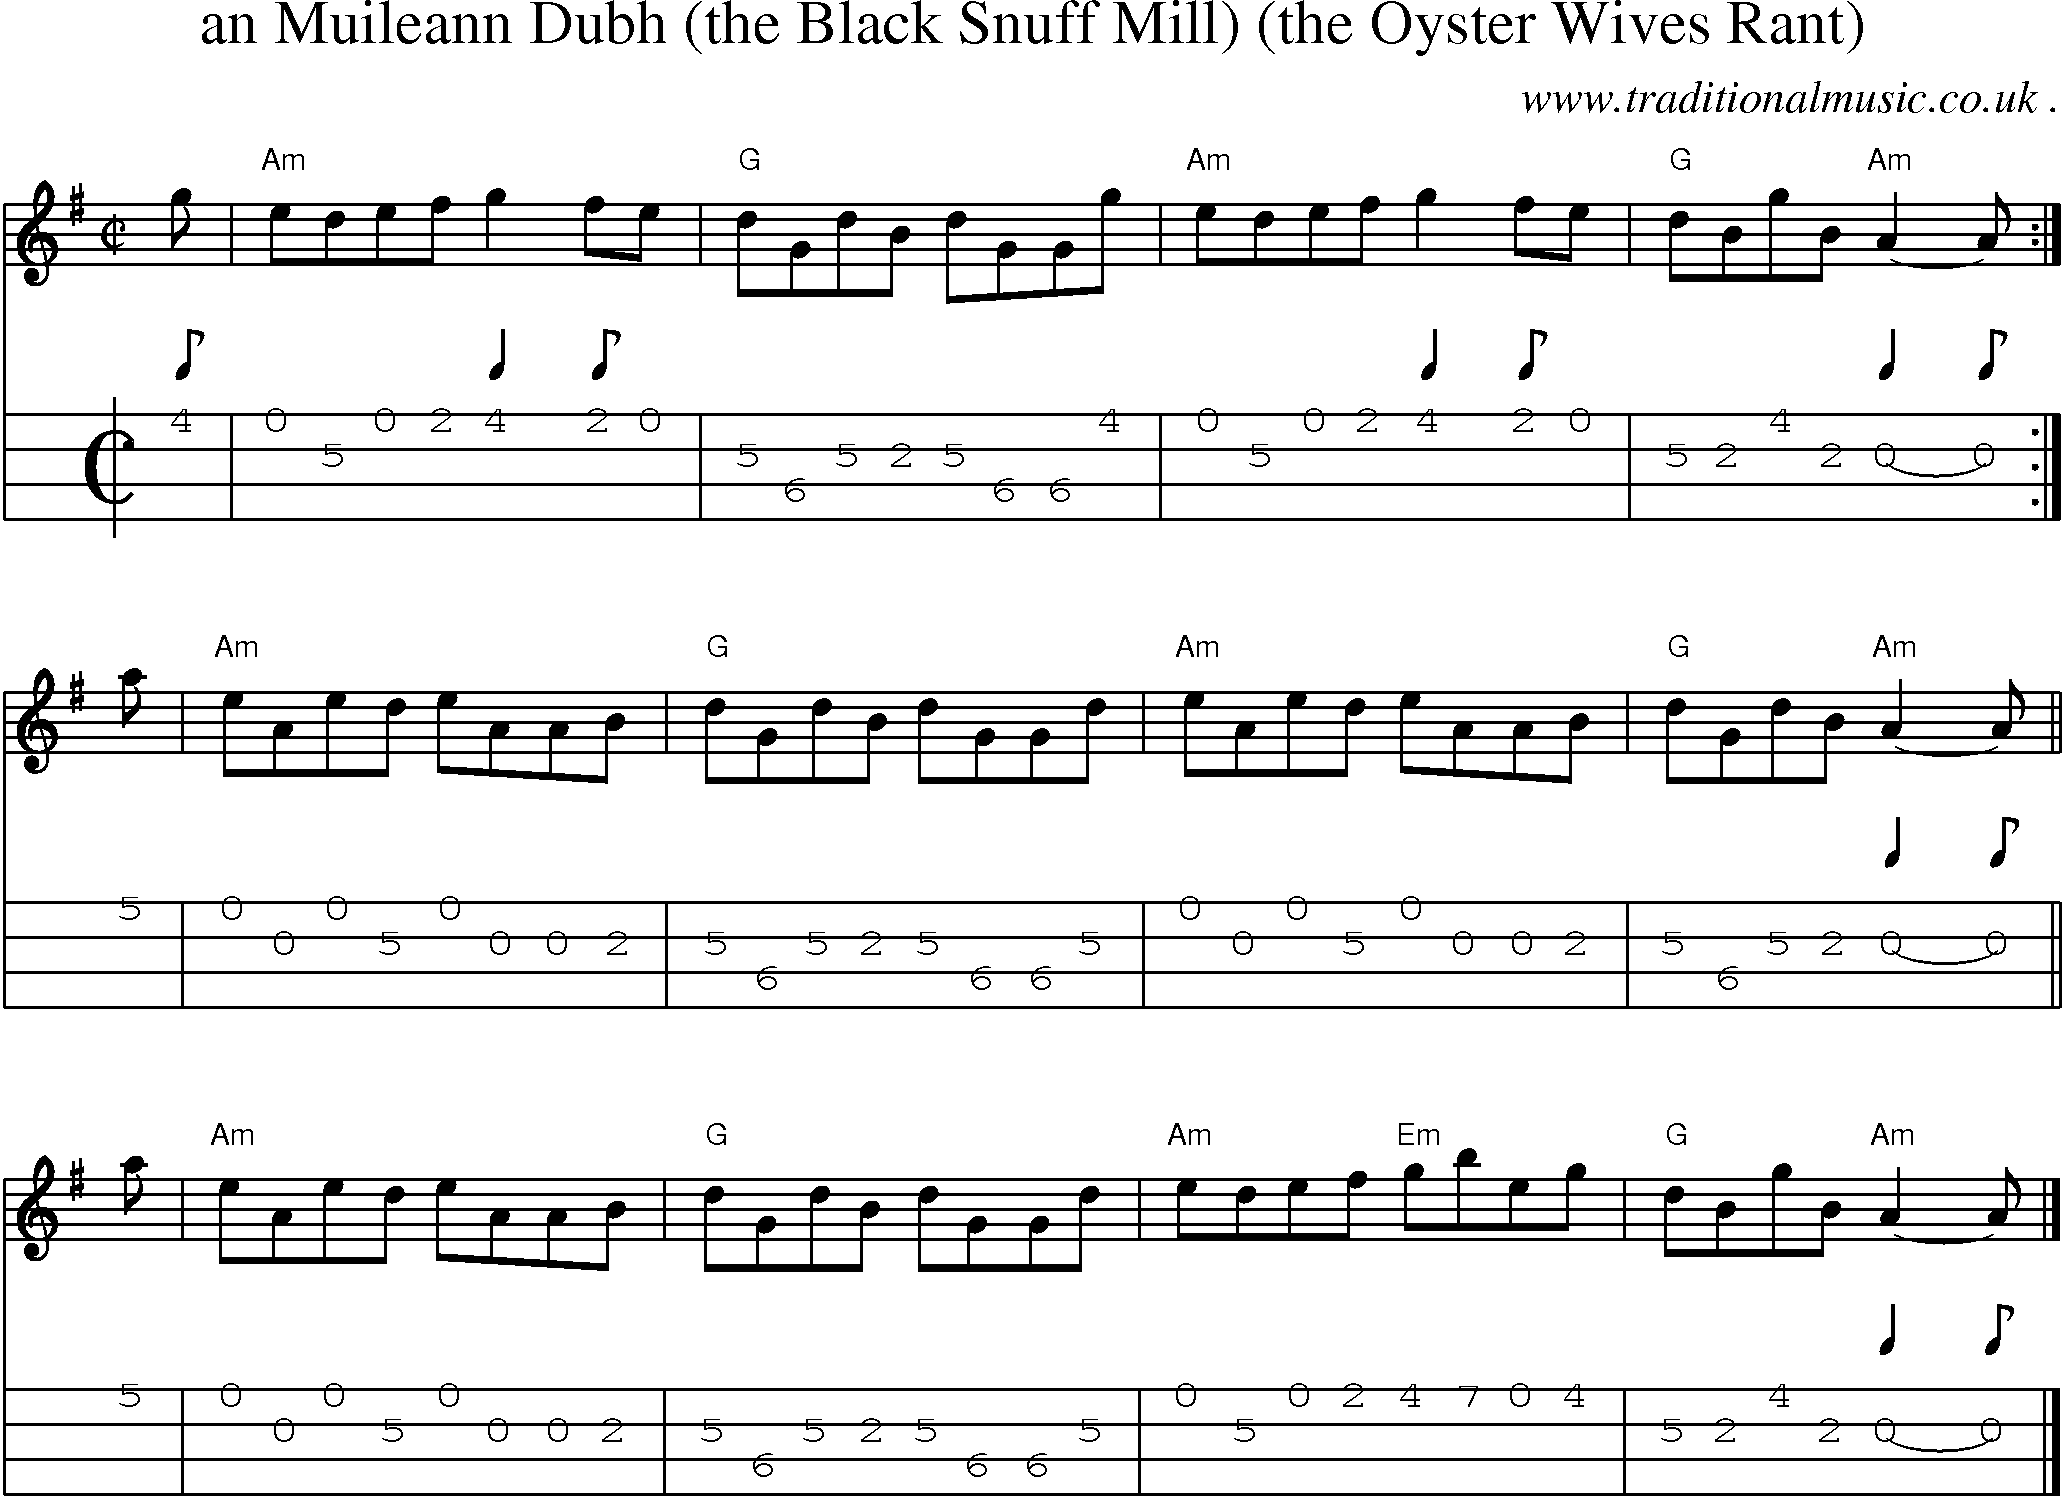 Sheet-music  score, Chords and Mandolin Tabs for An Muileann Dubh The Black Snuff Mill The Oyster Wives Rant